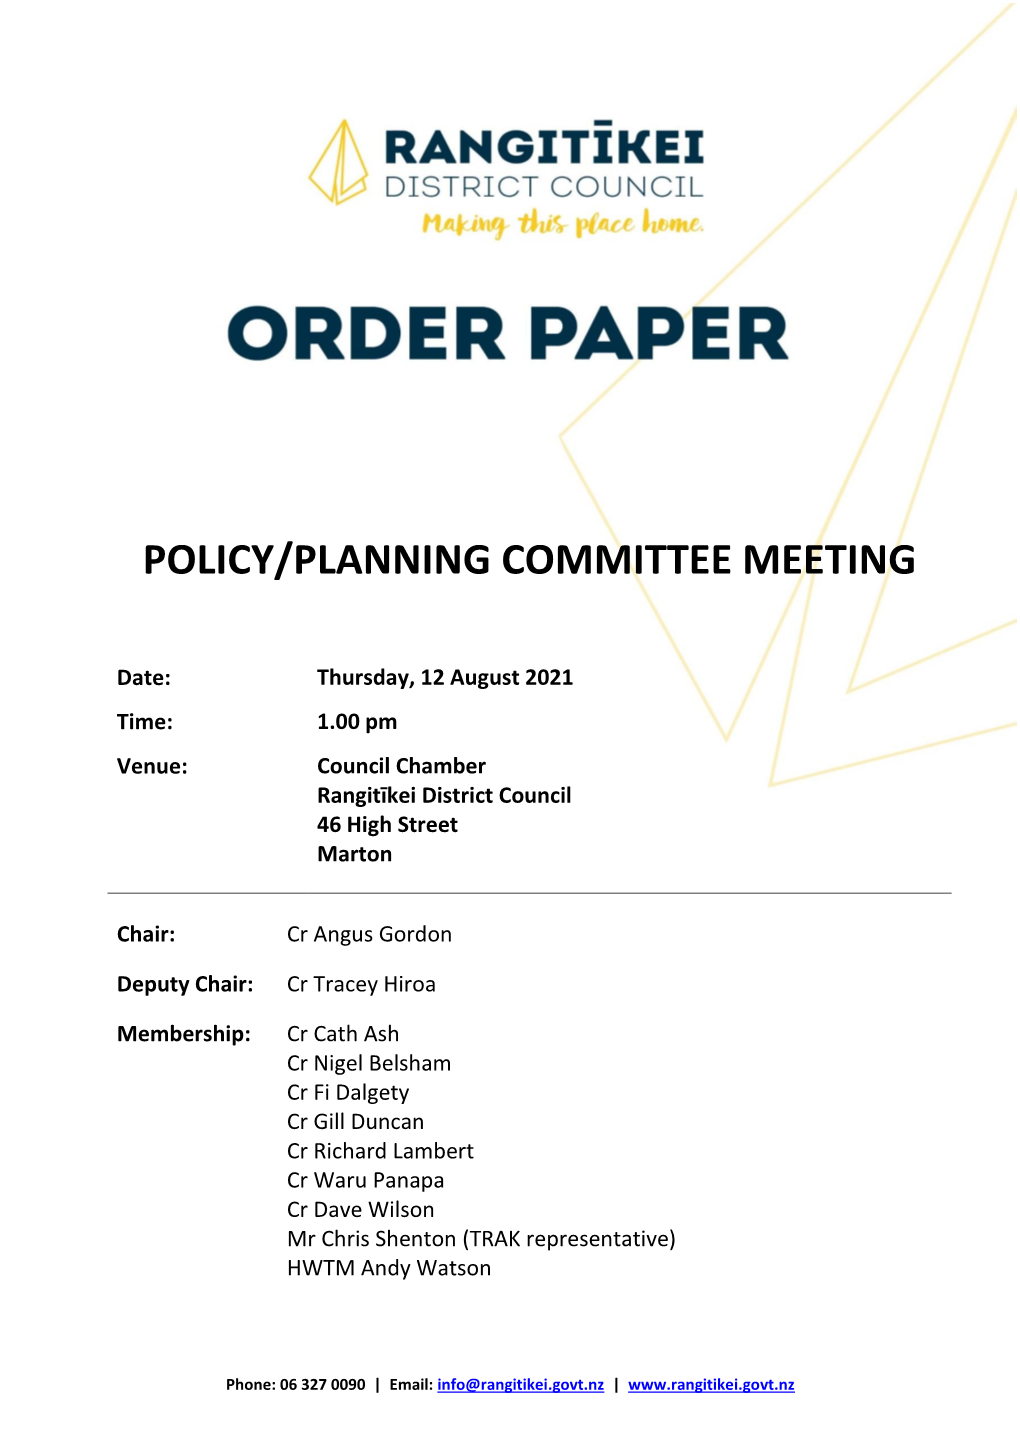 Agenda of Policy/Planning Committee Meeting